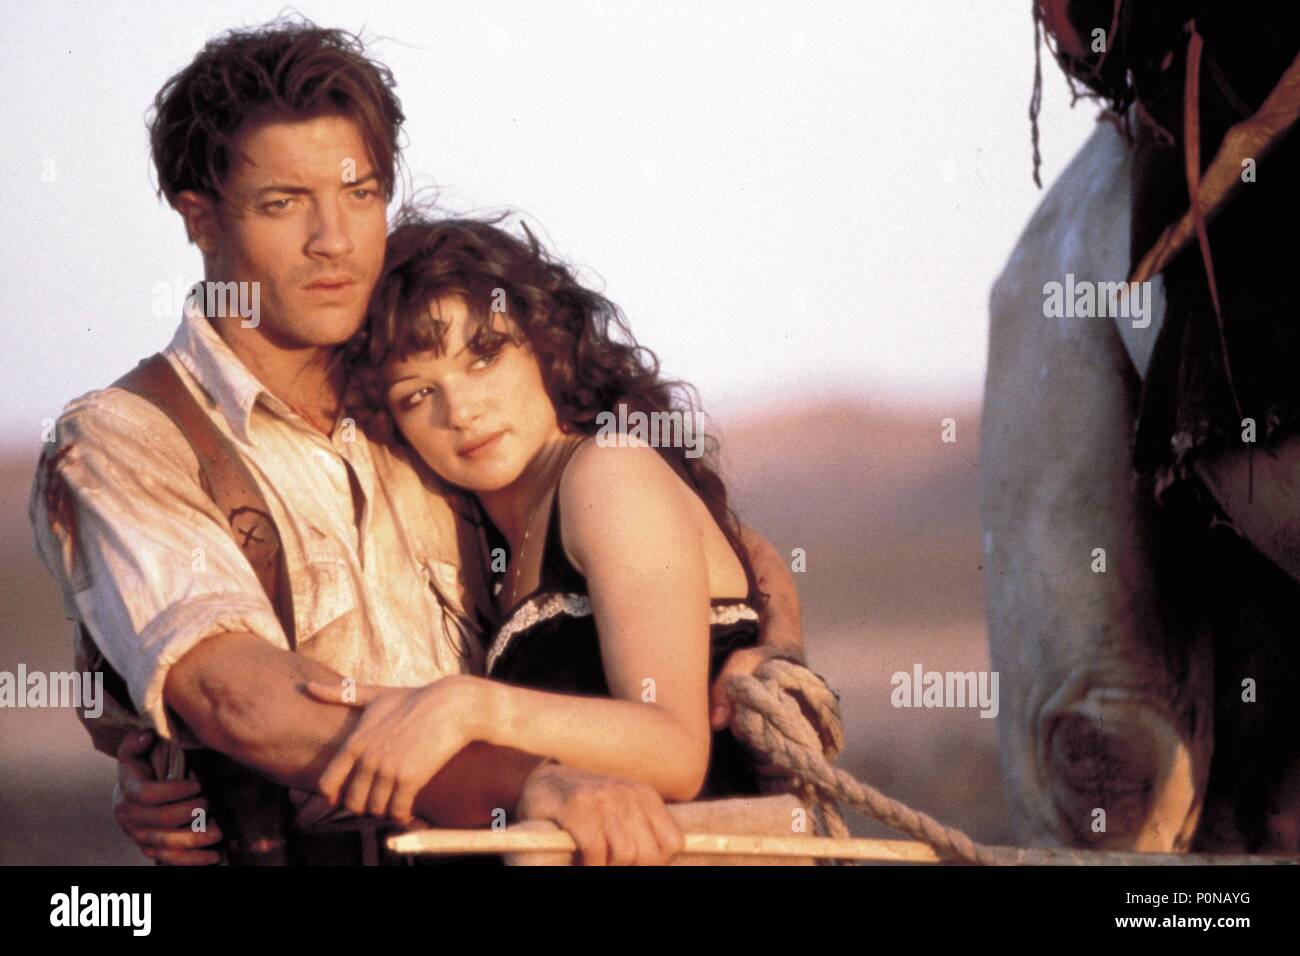 Original Film Title: THE MUMMY.  English Title: THE MUMMY.  Film Director: STEPHEN SOMMERS.  Year: 1999.  Stars: BRENDAN FRASER; RACHEL WEISZ. Credit: UNIVERSAL PICTURES / HAMSHERE, KEITH / Album Stock Photo